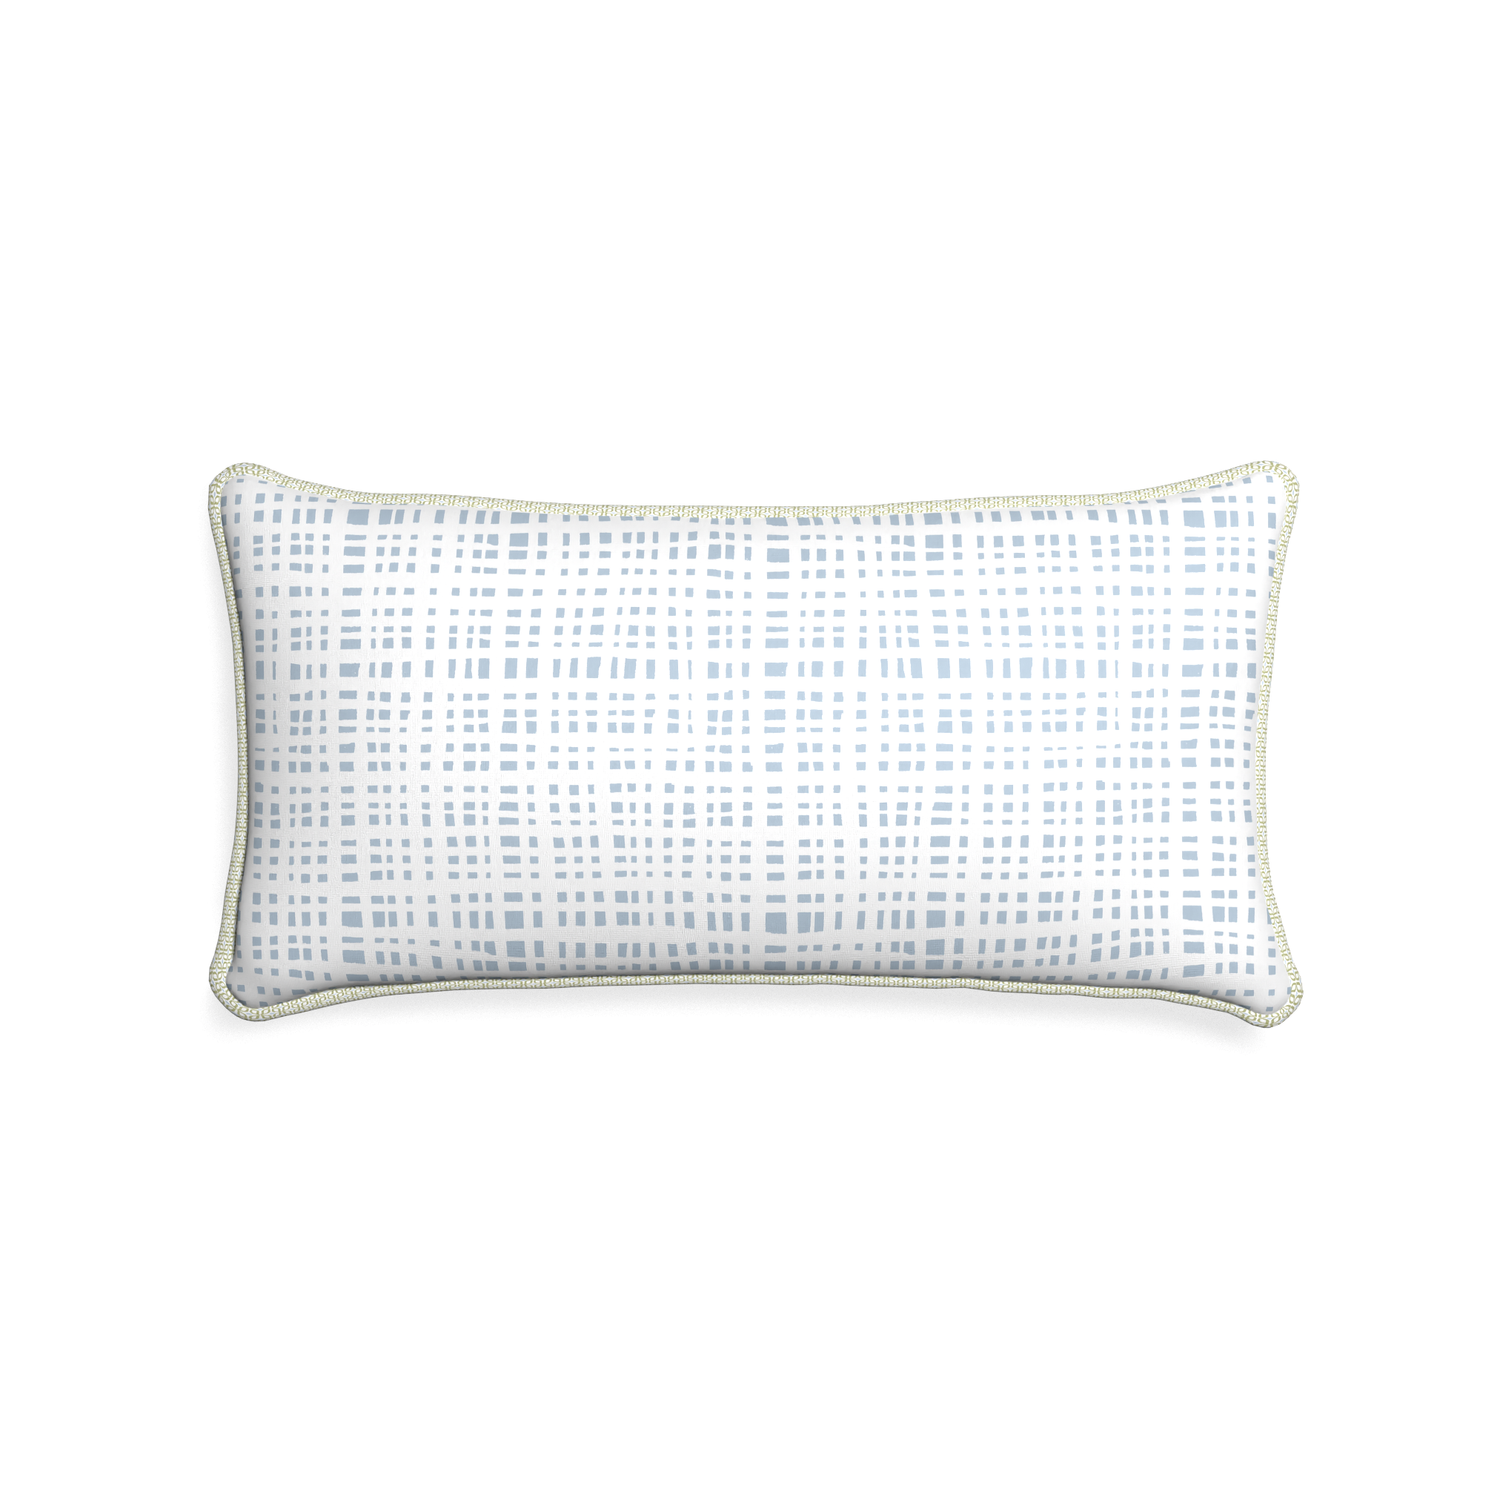 Midi-lumbar ginger sky custom plaid sky bluepillow with l piping on white background